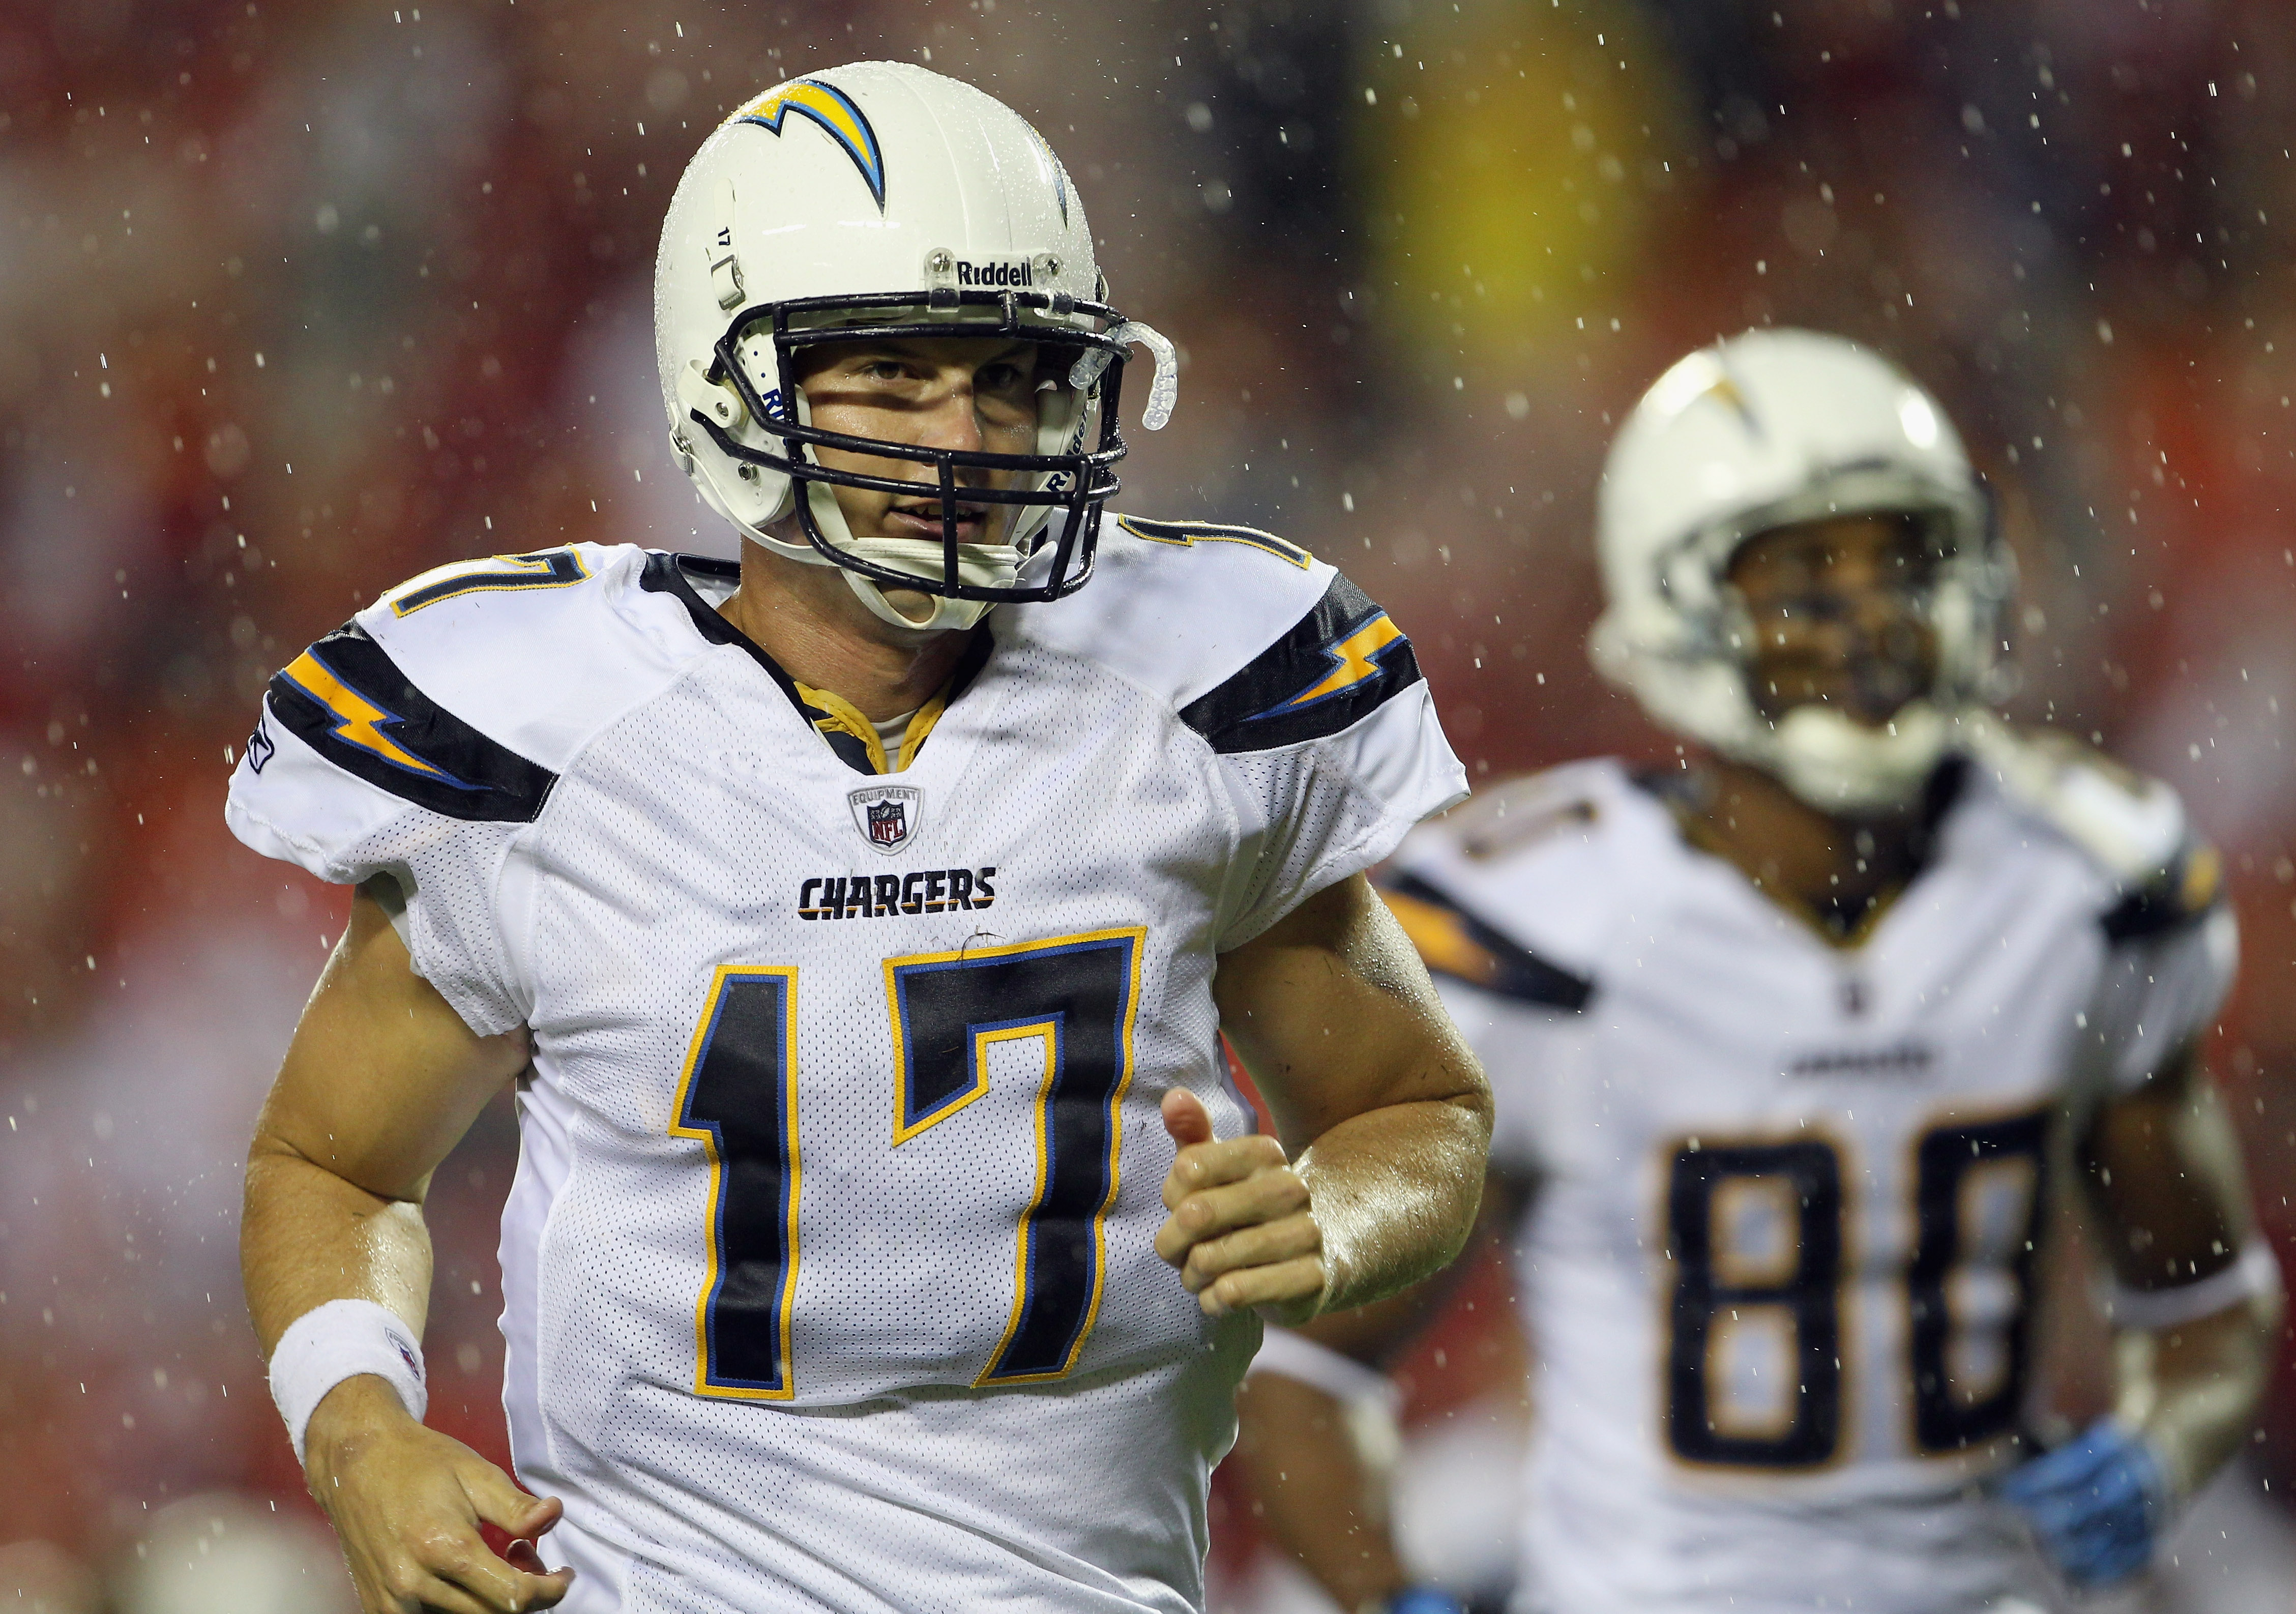 KANSAS CITY, MO - SEPTEMBER 13:  Quarterback Philip Rivers #17 of the San Diego Chargers walks off the field at halftime in the rain during the game against the Kansas City Chiefs on September 13, 2010 at Arrowhead Stadium in Kansas City, Missouri.  (Phot